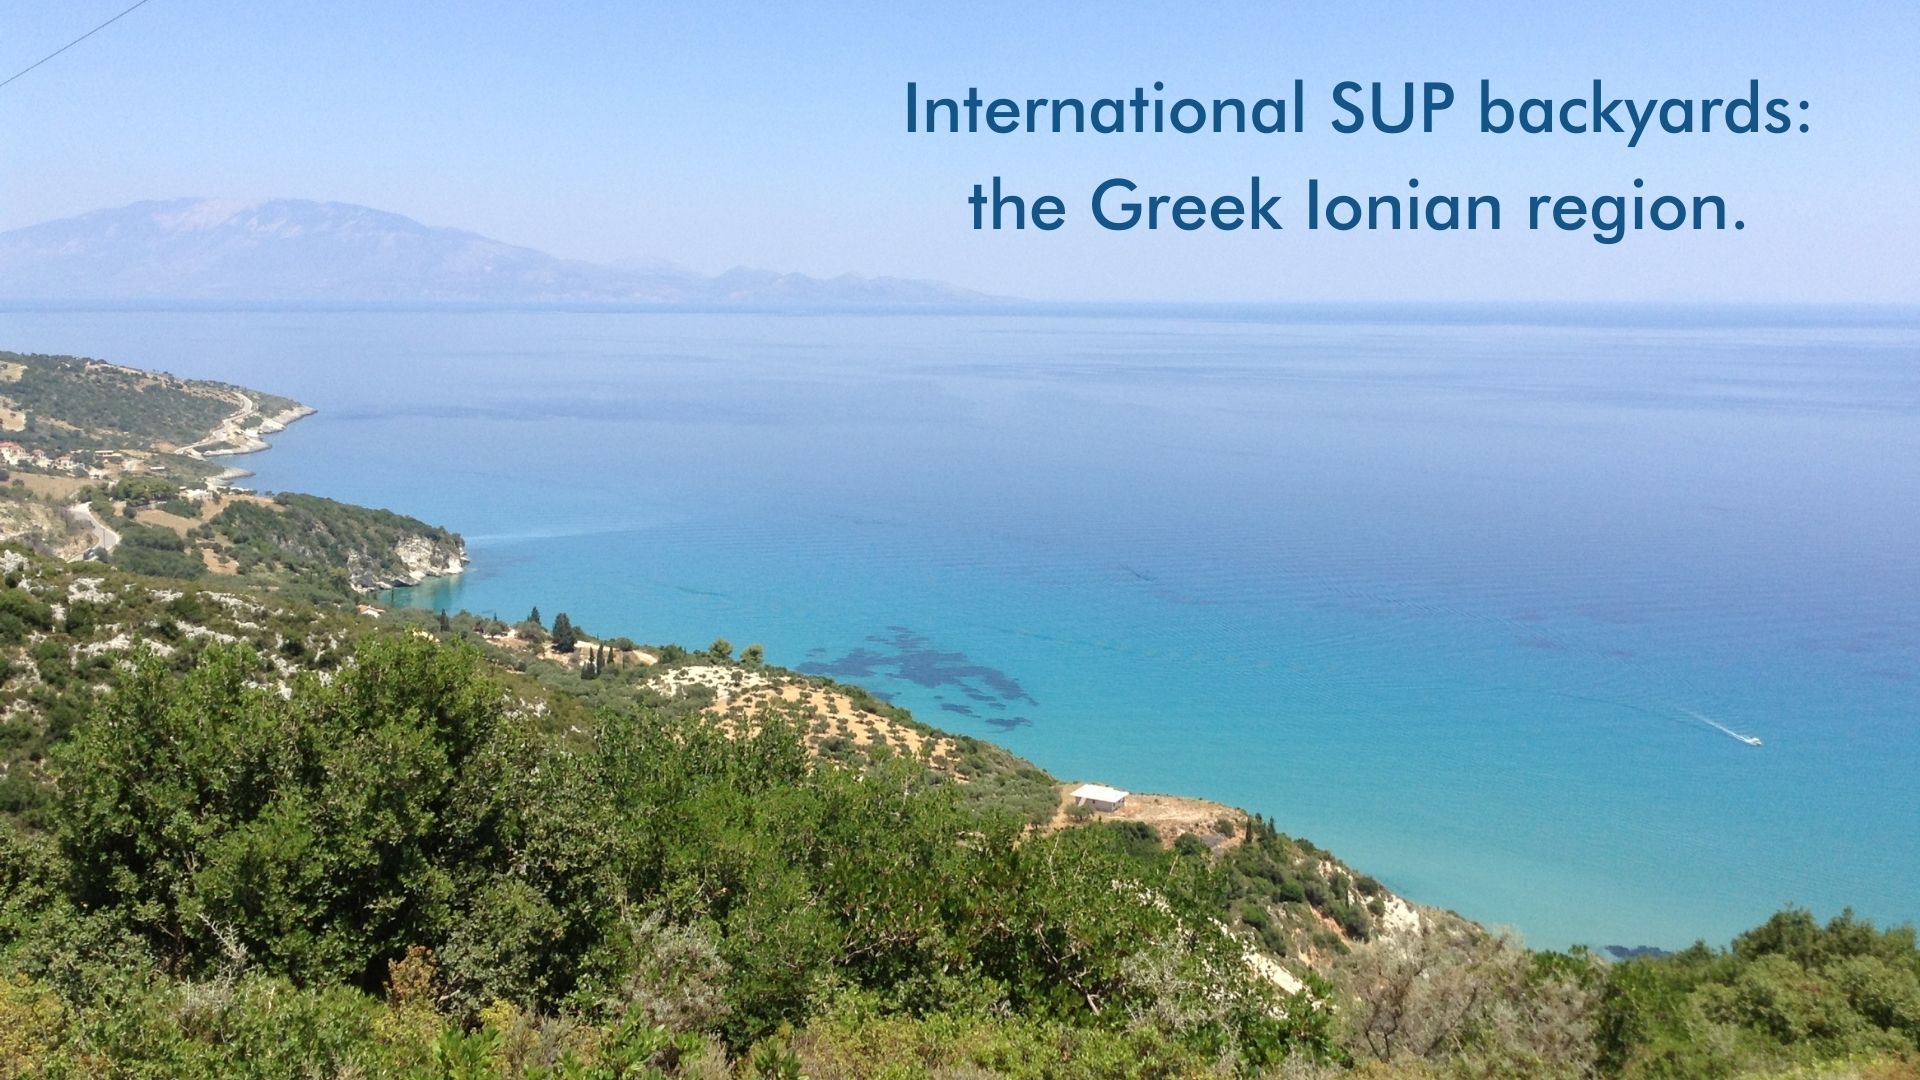 You are currently viewing International SUP backyards: the Greek Ionian region.